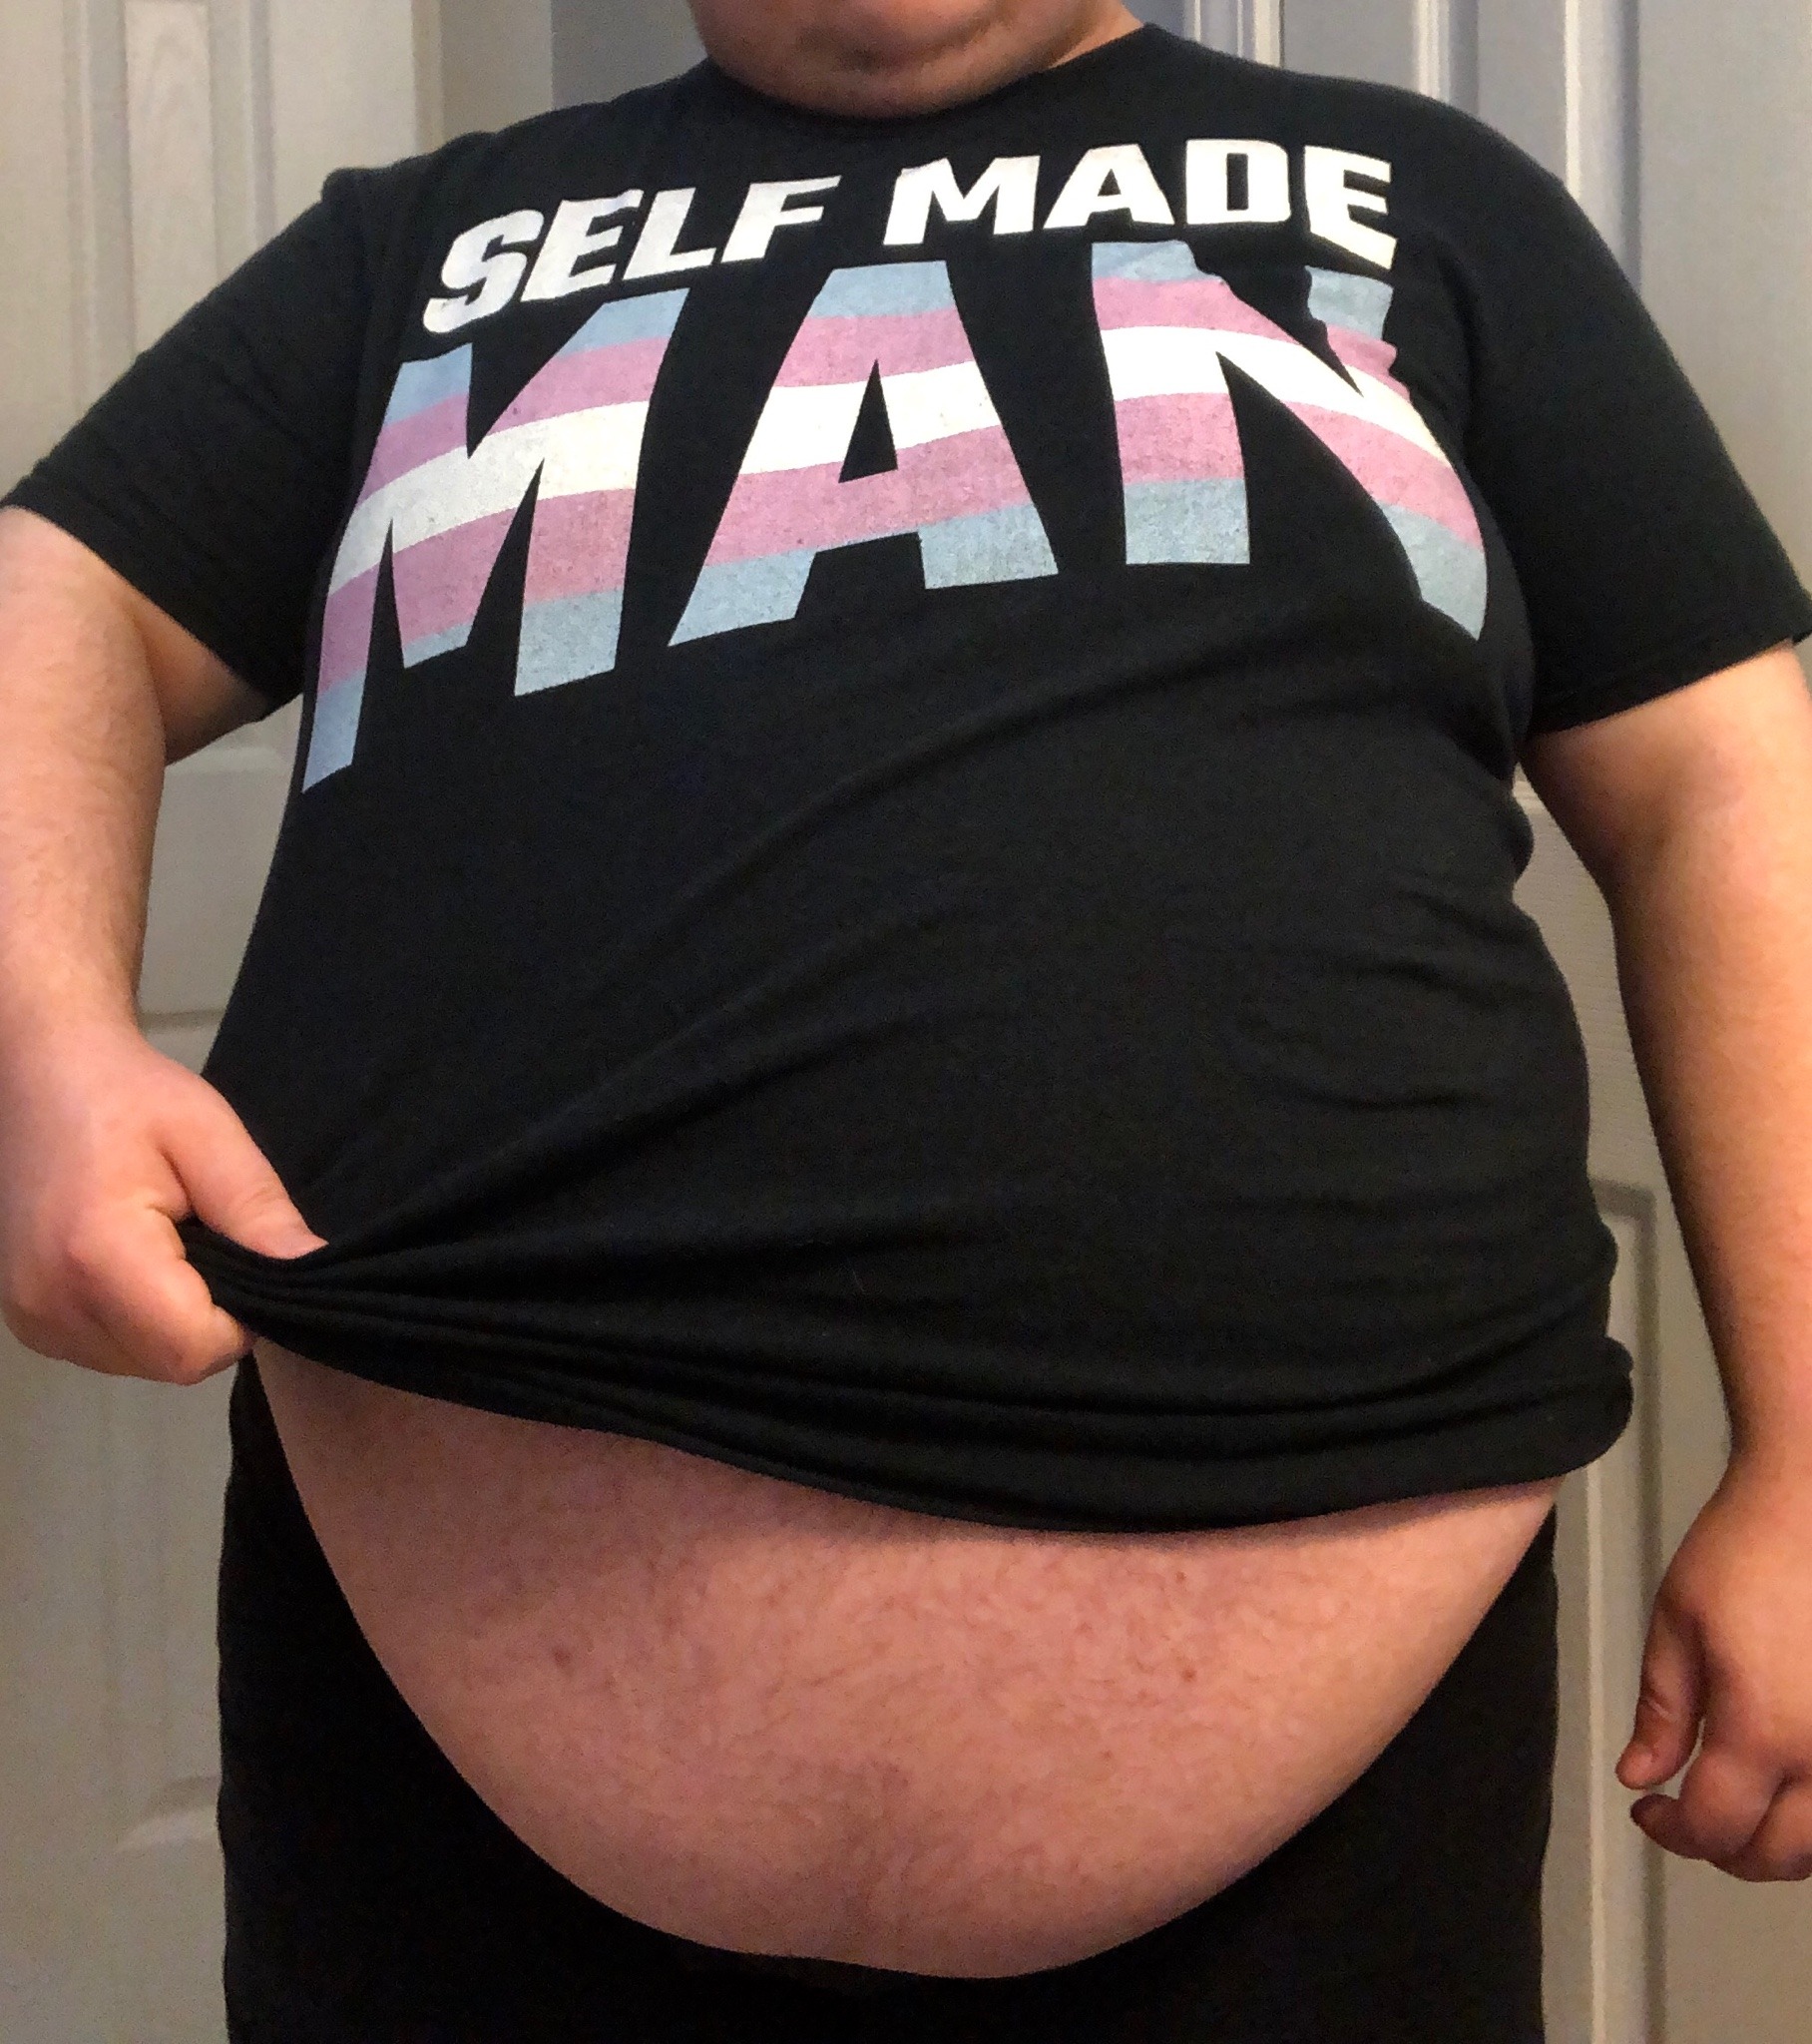 chubote:Happy Trans Day of Visibility and Tummy Tuesday from your local trans fat 😋 Support our good chonky boi